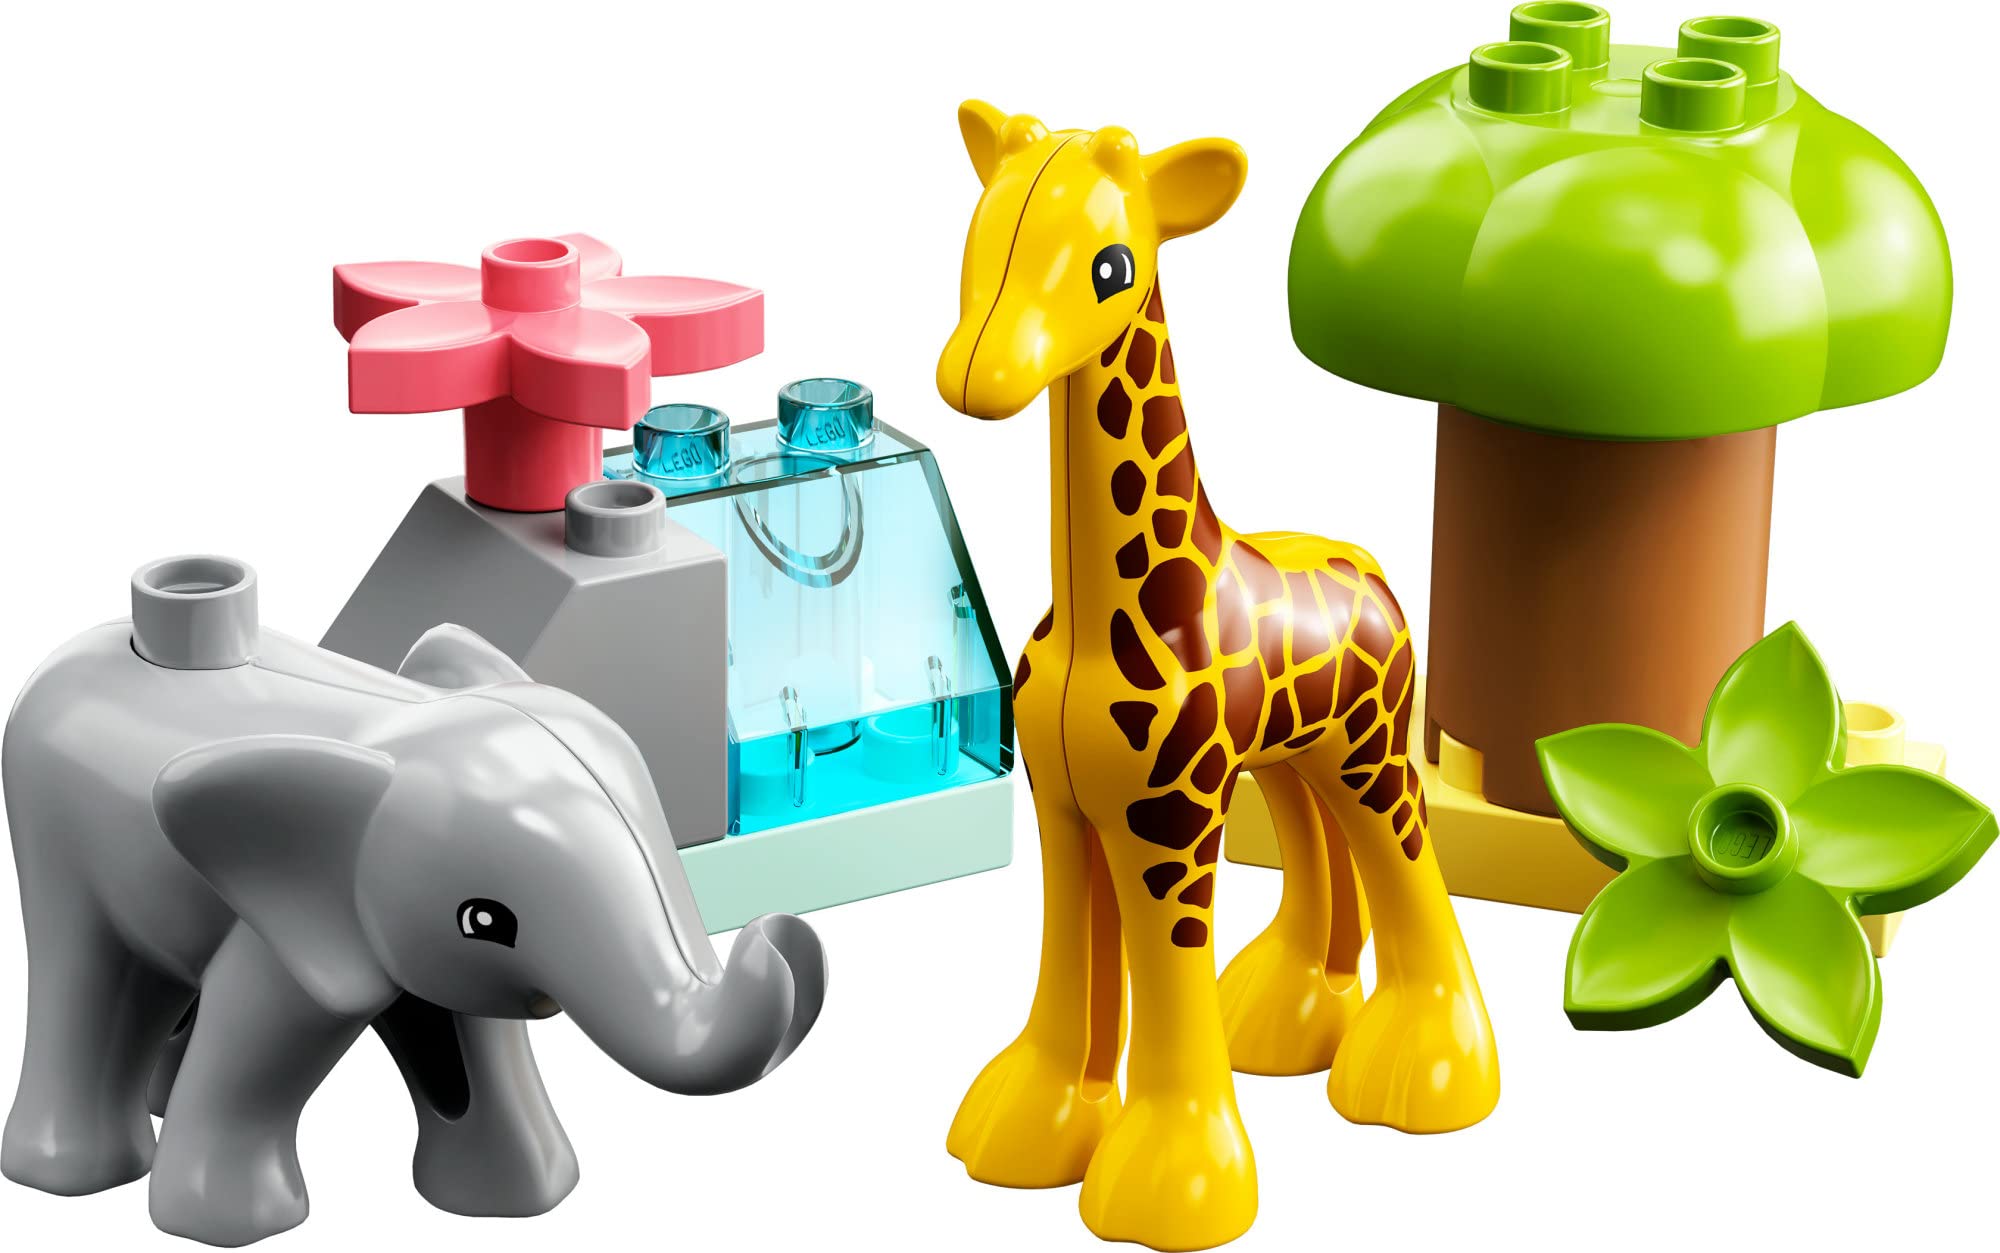 LEGO DUPLO Wild Animals of Africa 10971, Animal Toys for Toddlers, Girls & Boys Ages 2 Plus Years Old, Learning Toy with Baby Elephant & Giraffe Figures